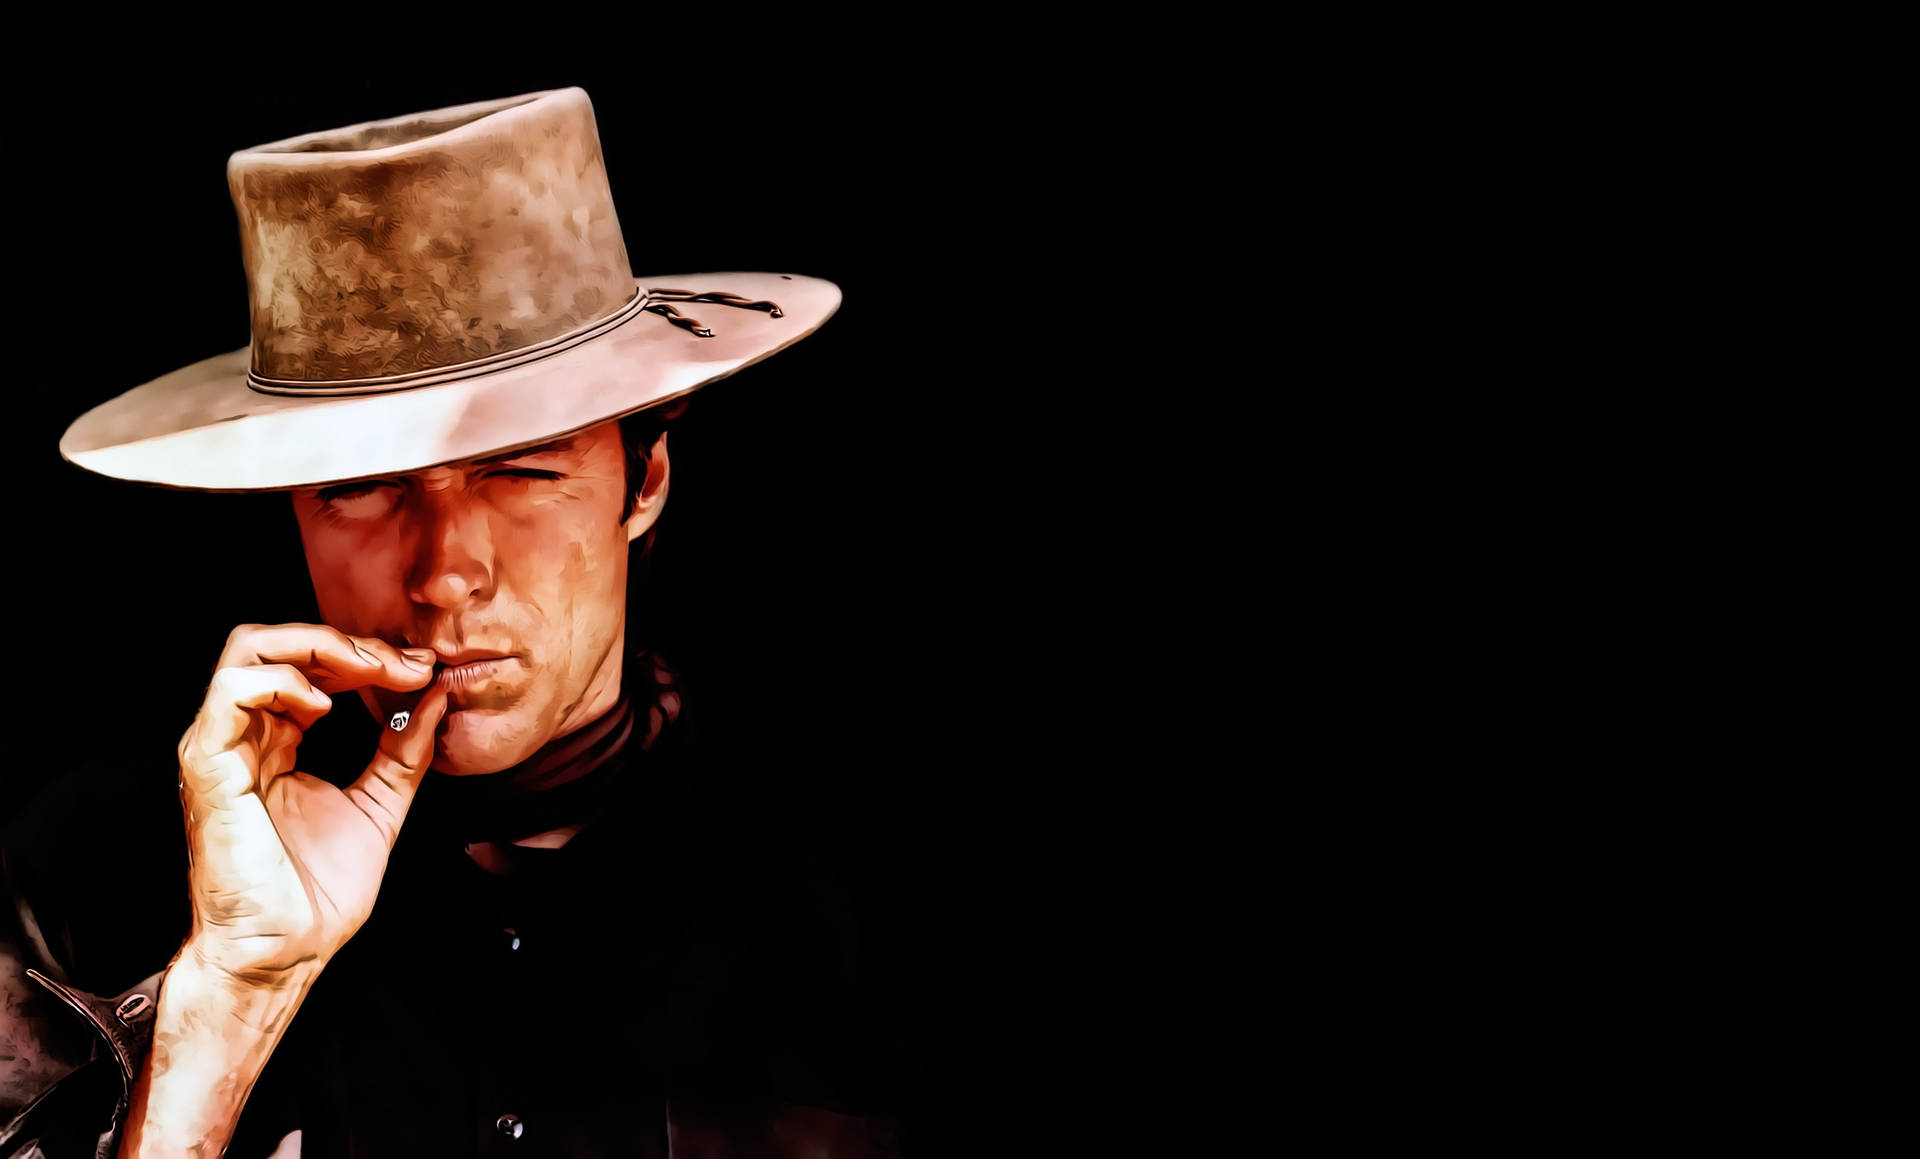 Download Clint Eastwood Fistful Of Dollars Smoking Wallpaper | Wallpapers .com